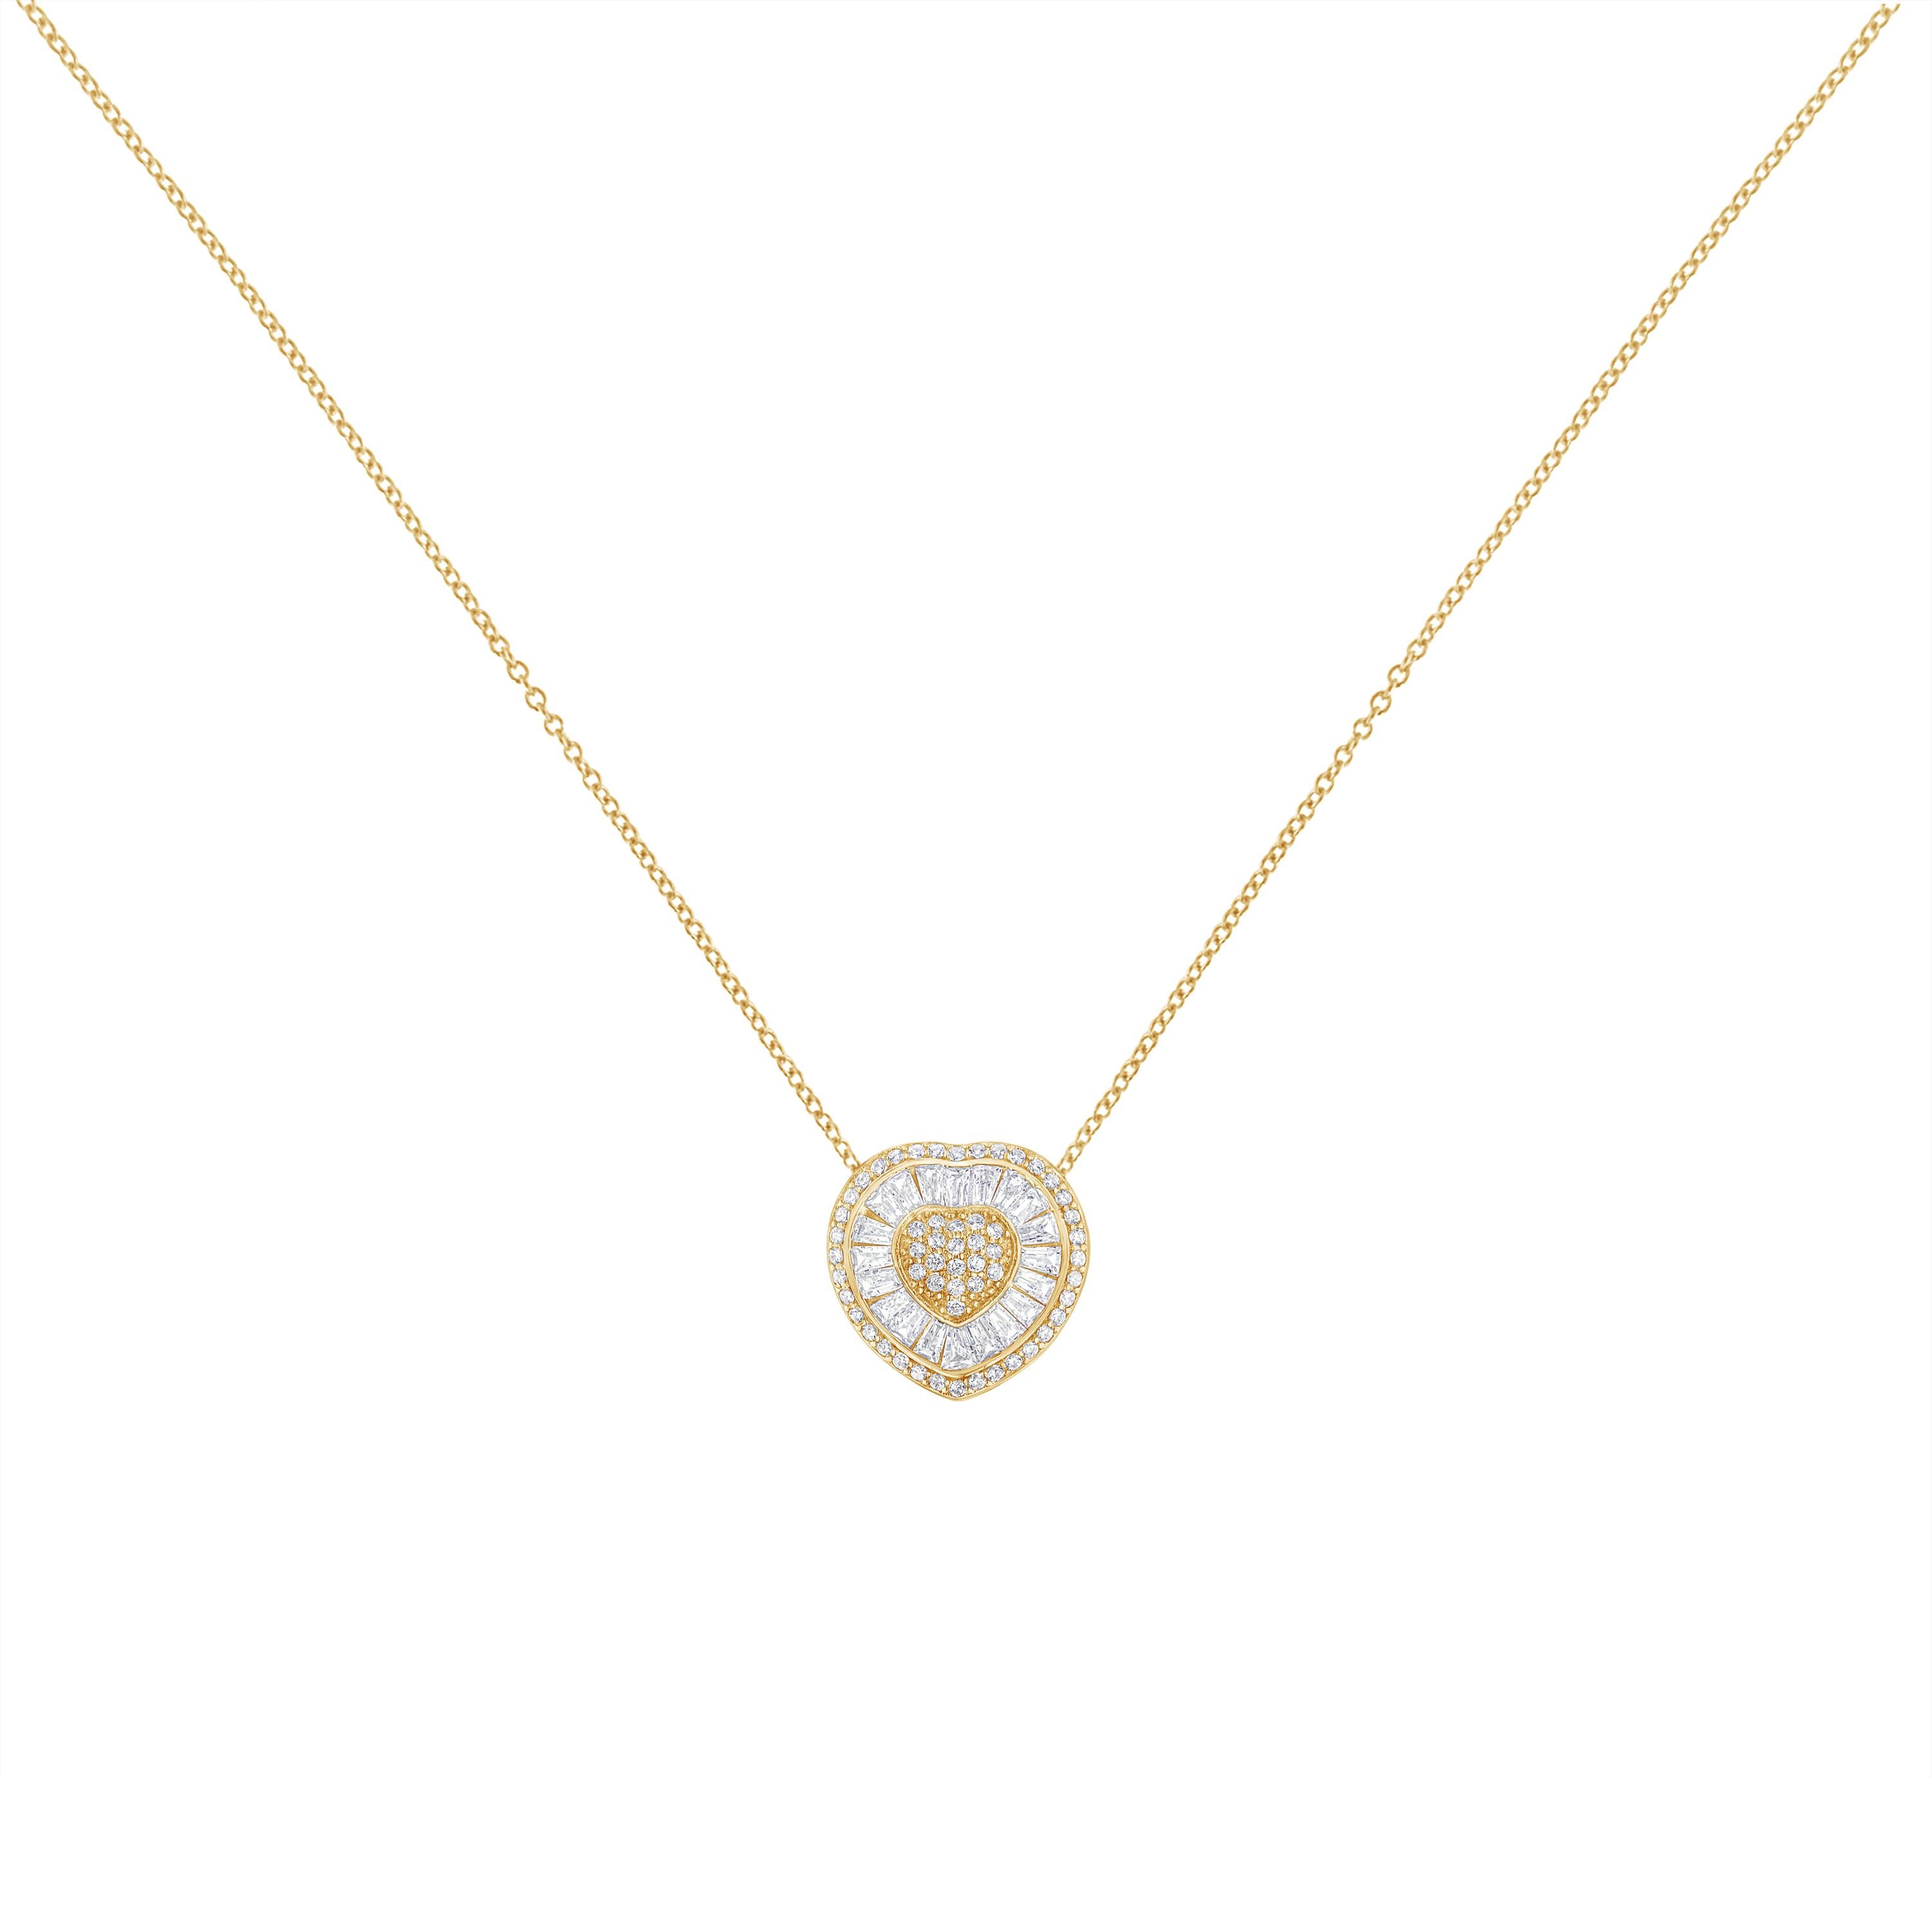 A beautiful gold and diamond heart shaped pendant. This necklace is made with 31 round and 22 baguette-cut diamonds in a prong and channel setting, respectively. The diamonds are set in a lustrous 10k yellow gold, and the pendant comes with a box